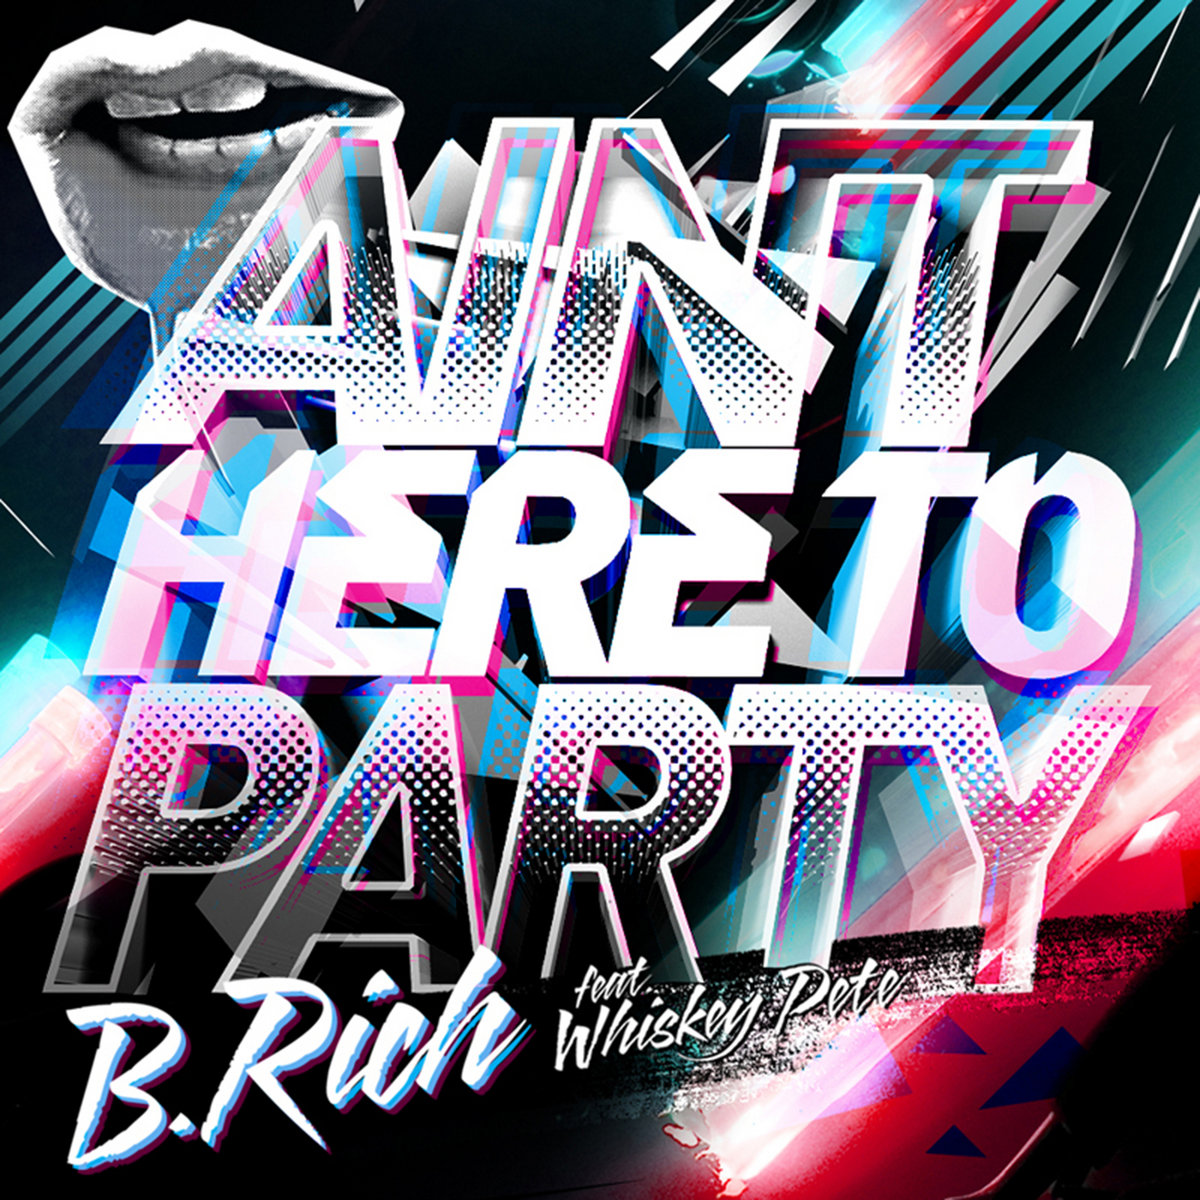 B.Rich & Whiskey Pete – Ain’t Here to Party